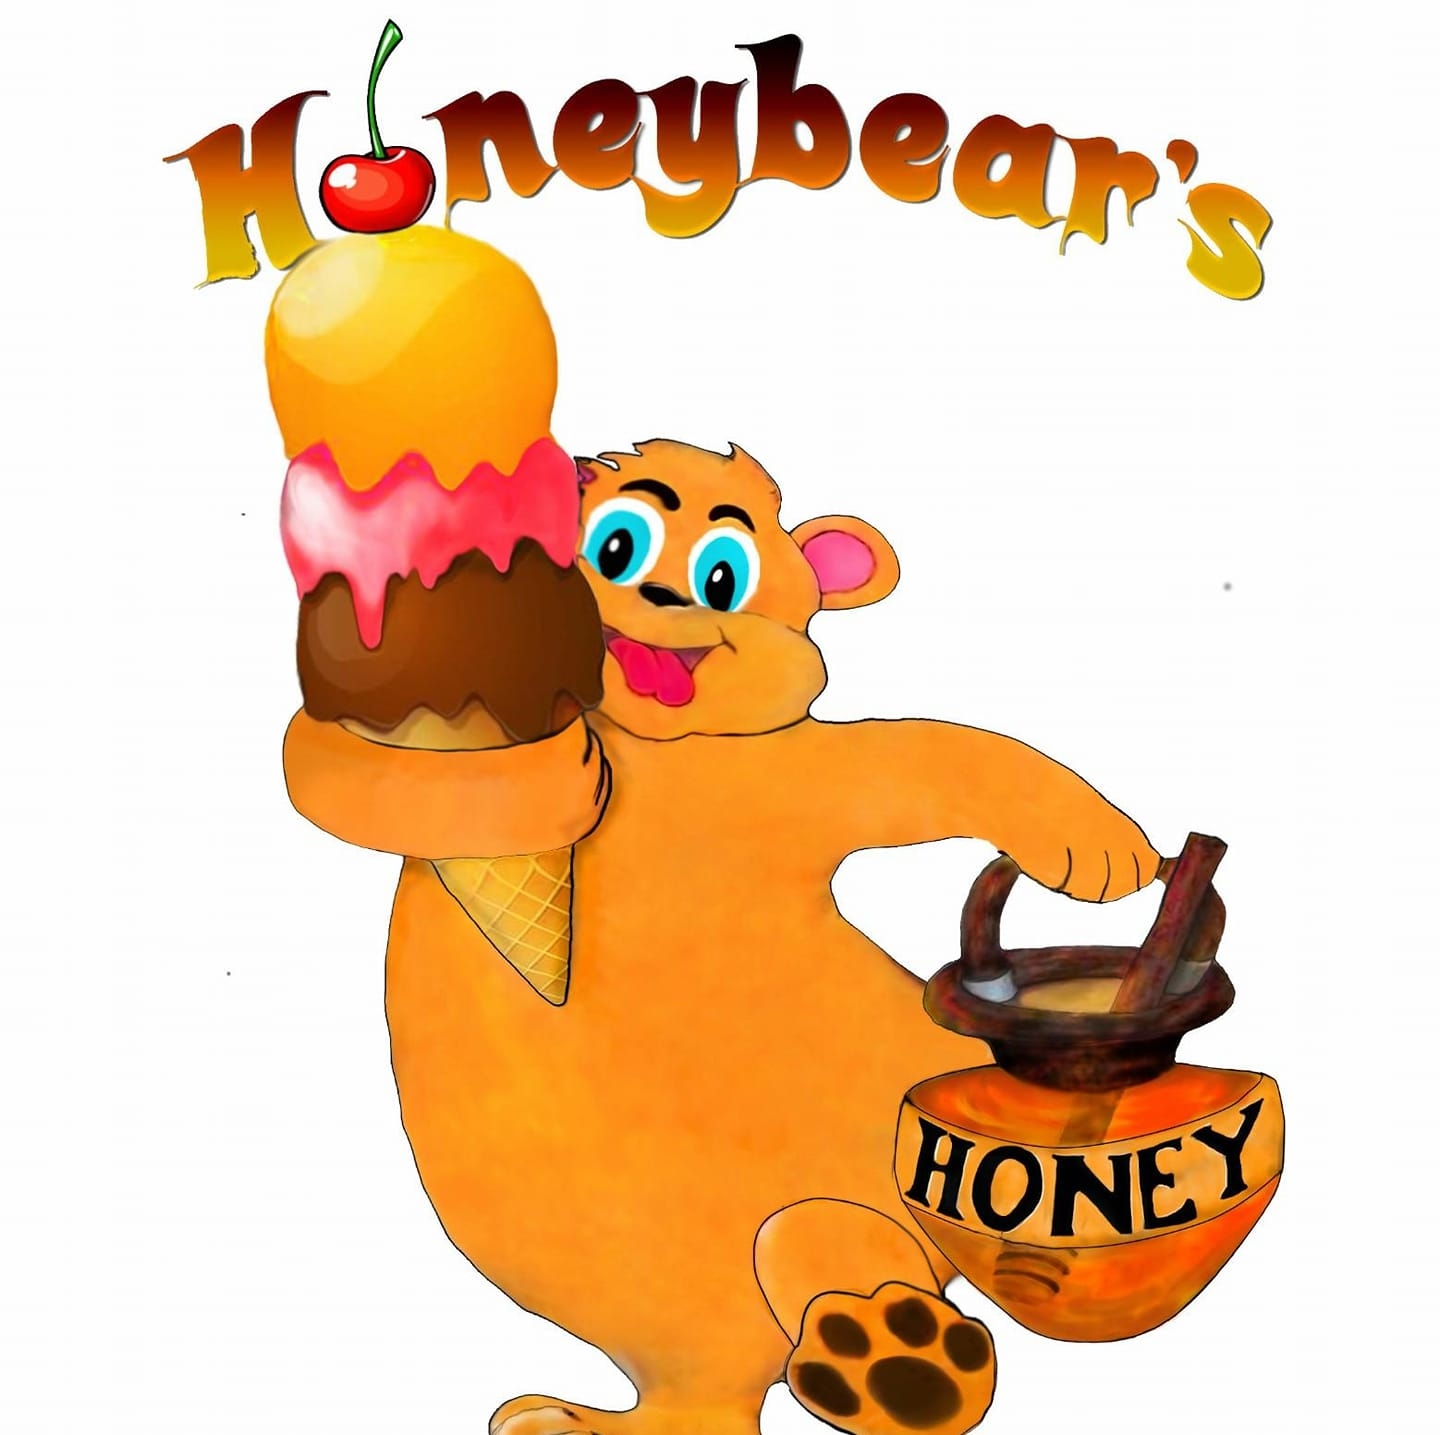 Read more about the article Honeybear’s Frozen Scoops Serves Up Spirited Sweets